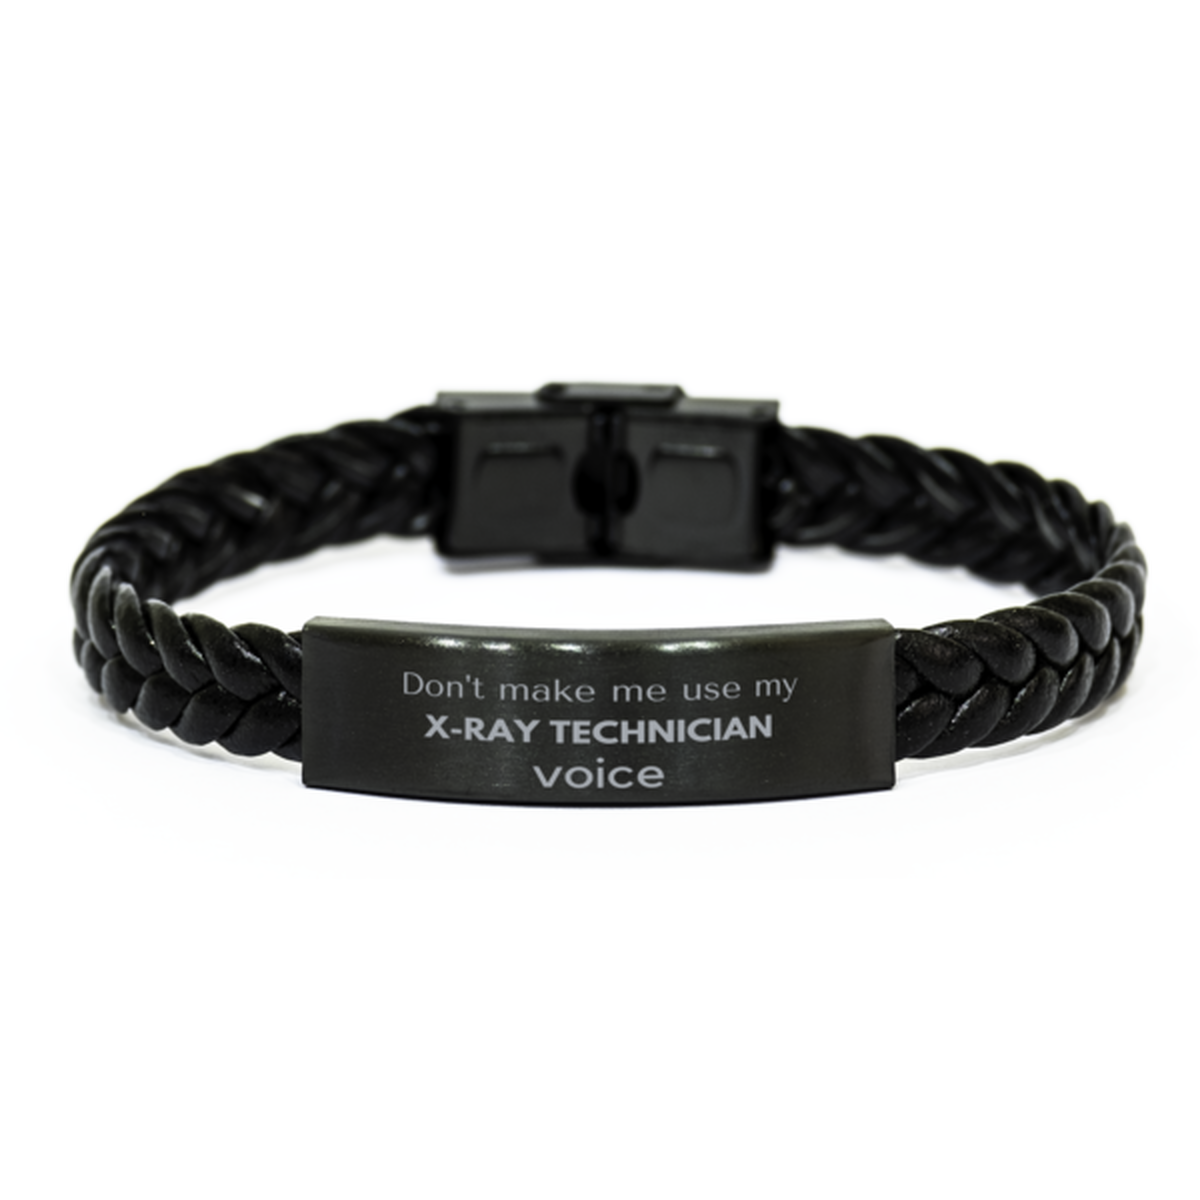 Don't make me use my X-Ray Technician voice, Sarcasm X-Ray Technician Gifts, Christmas X-Ray Technician Braided Leather Bracelet Birthday Unique Gifts For X-Ray Technician Coworkers, Men, Women, Colleague, Friends